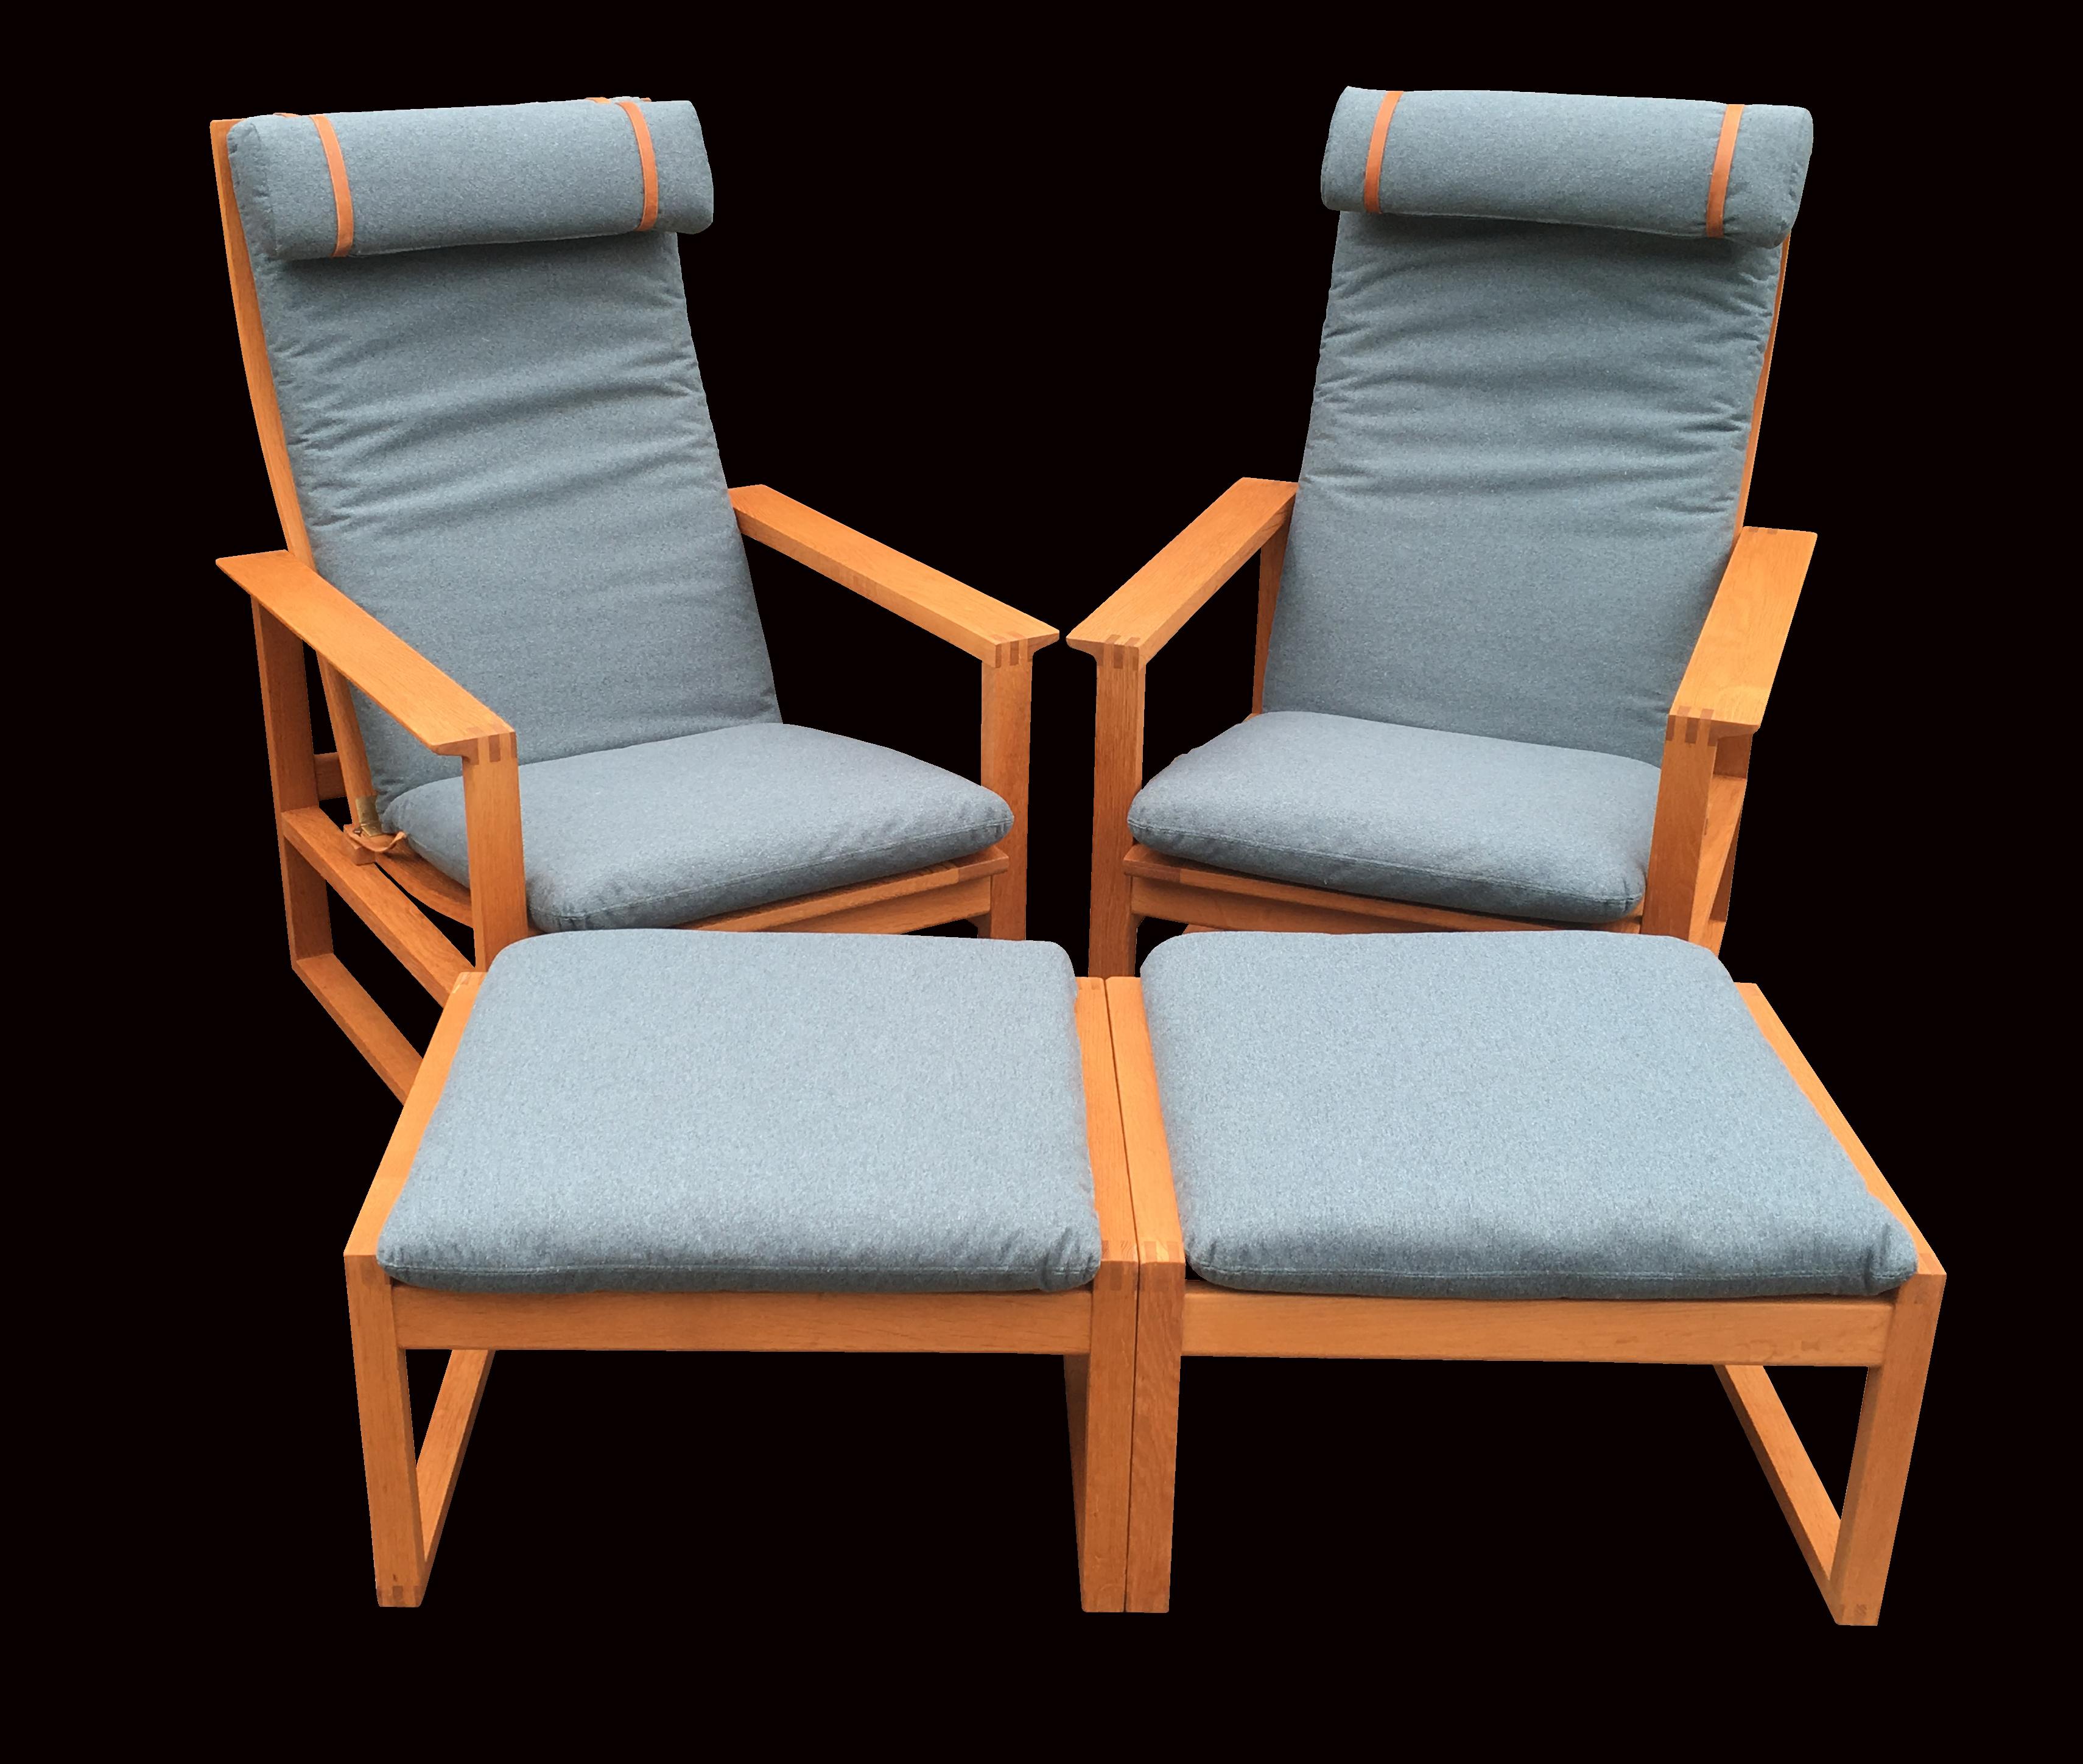 Pair of very good original high back 2 position sled chairs with ottomans in very nice golden oak.
these retain most of their original labels and the only thing not original are the freshly upholstered covers which are zipped so can easily be